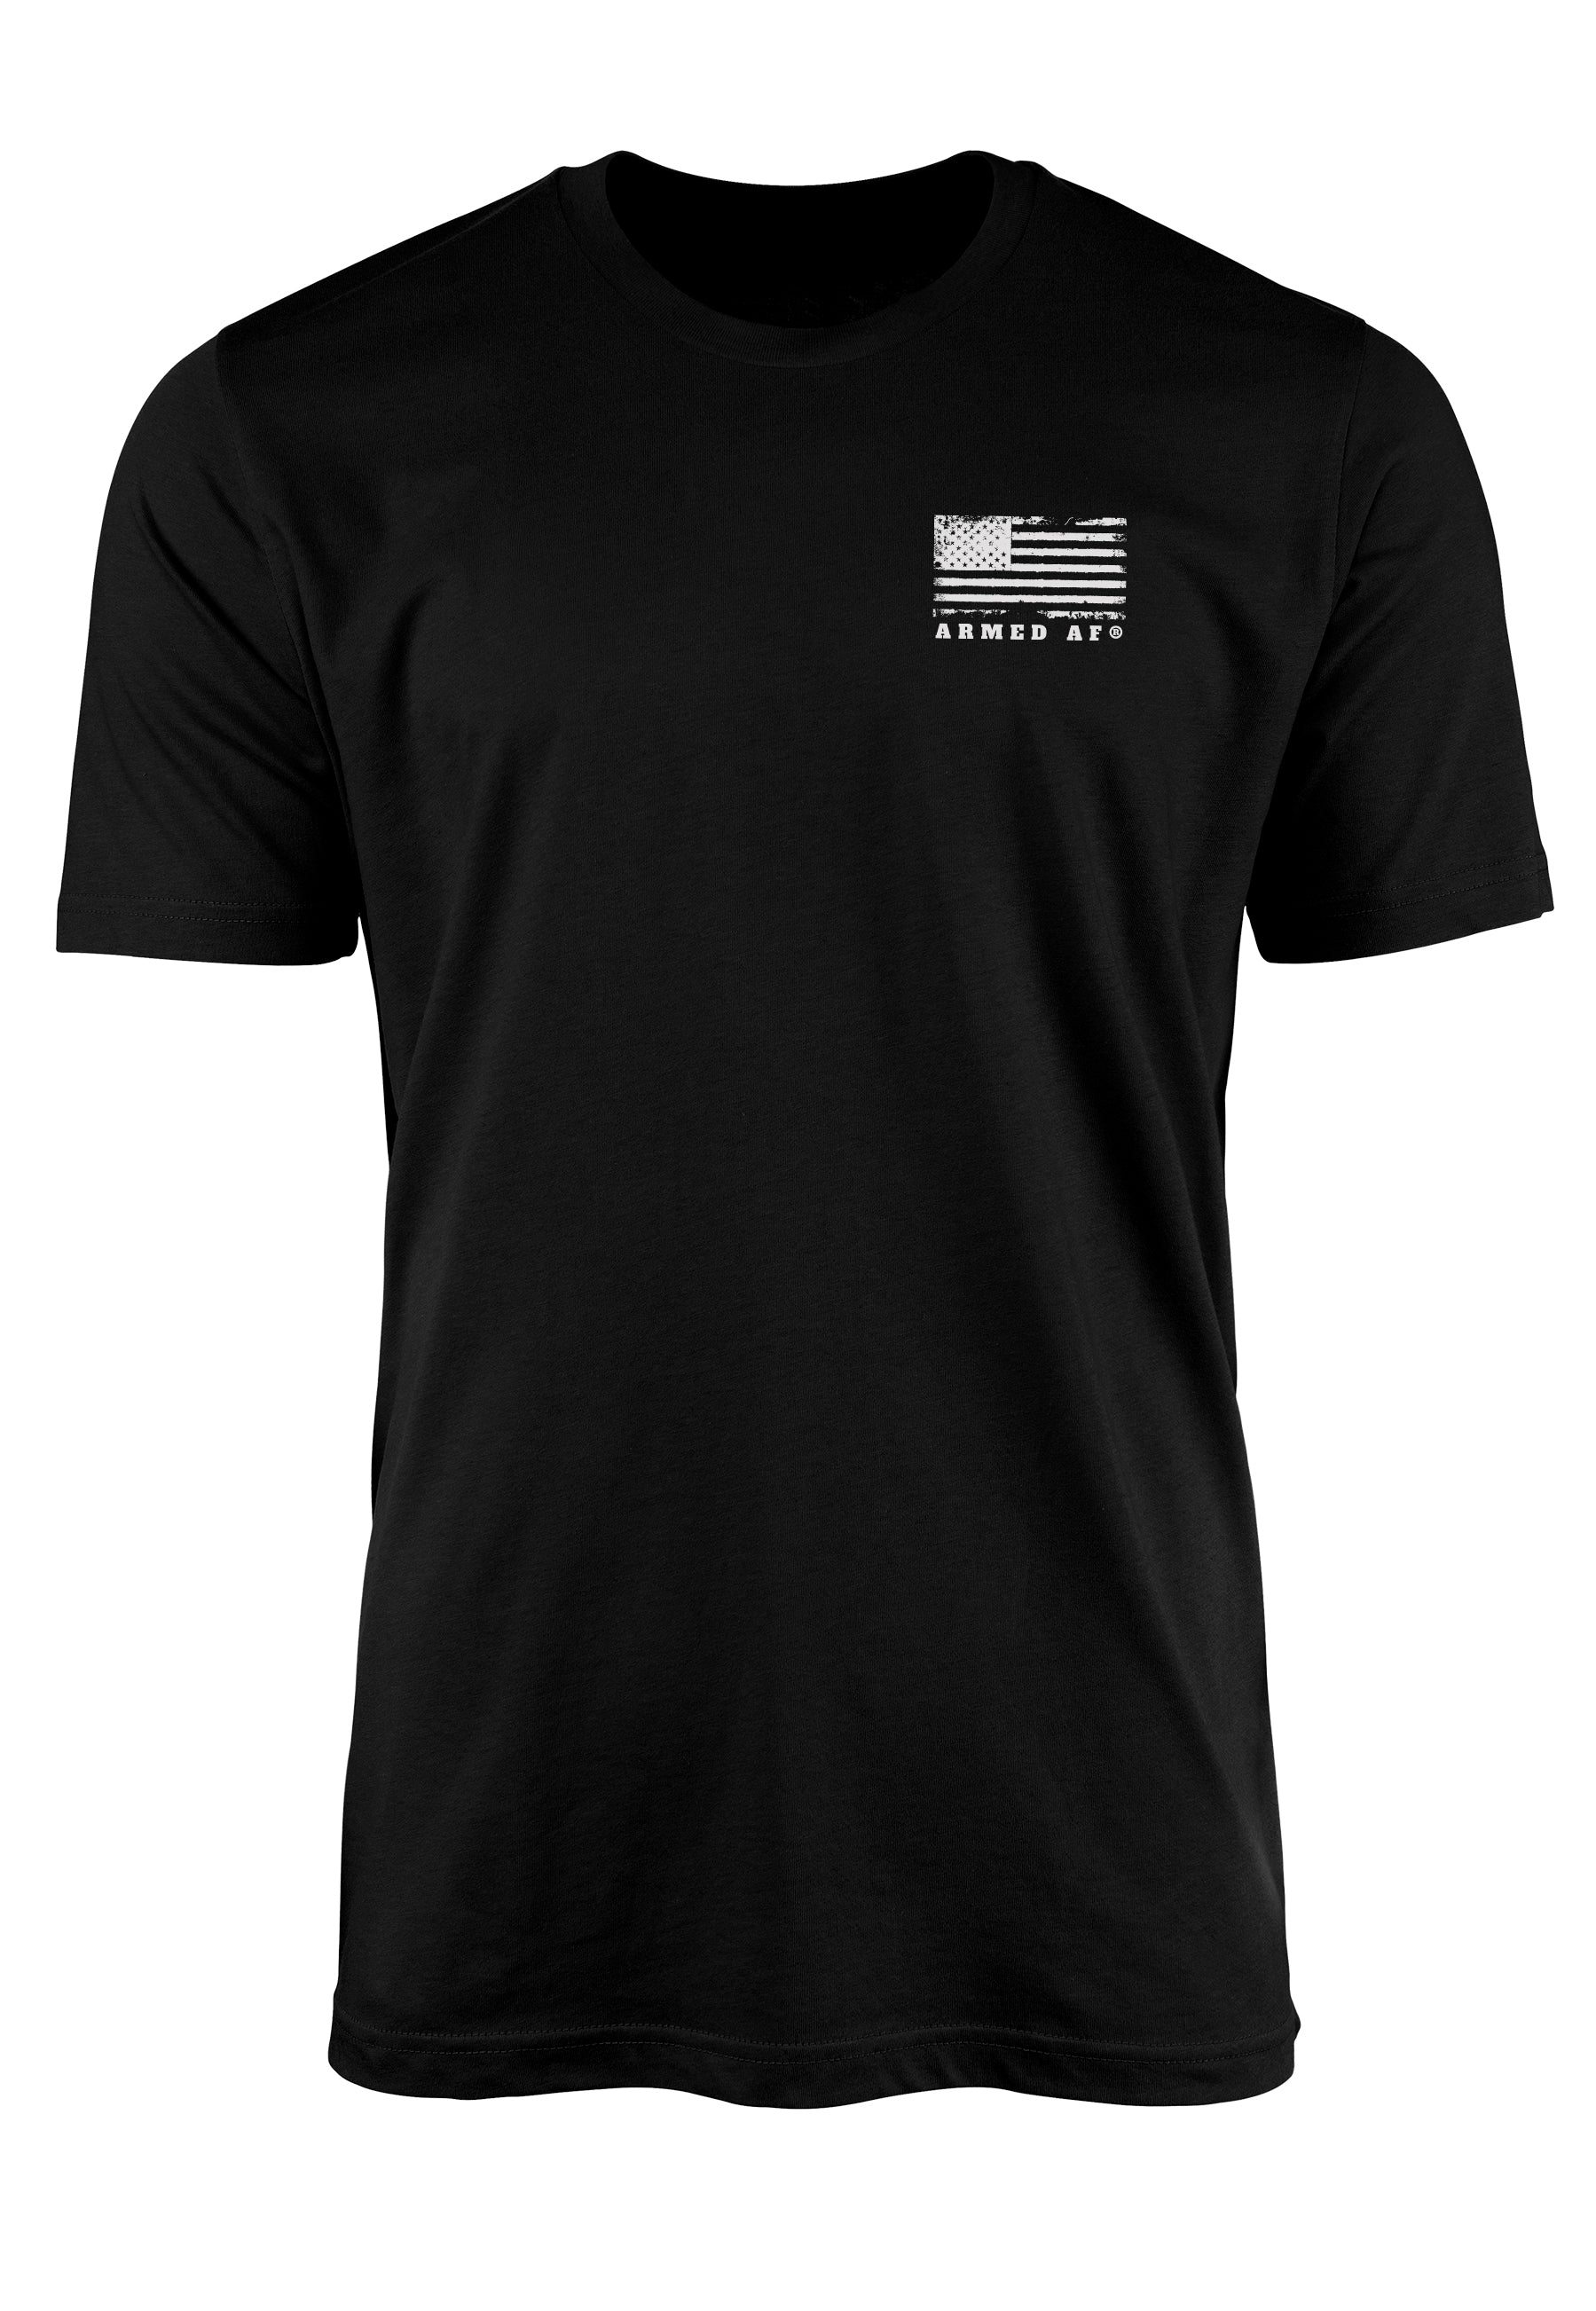 Left chest American Flag logo on a second amendment t-shirt from Armed AF® brand